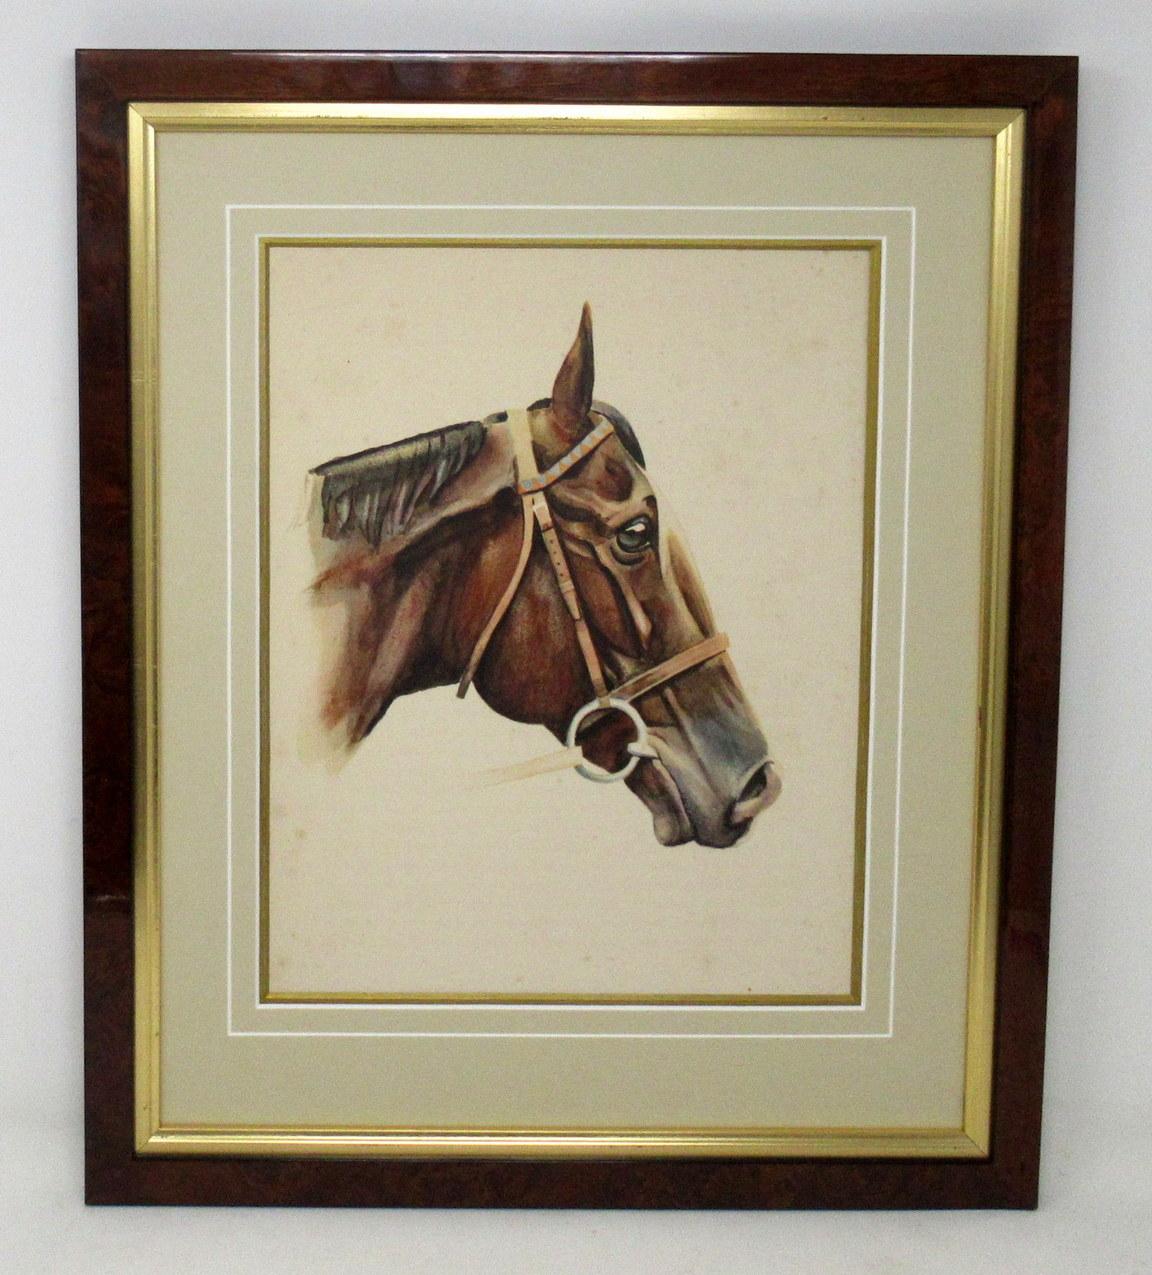 Edwardian Antique Equine Racehorse Painting Tourbillon French Thoroughbred Horse Racing 